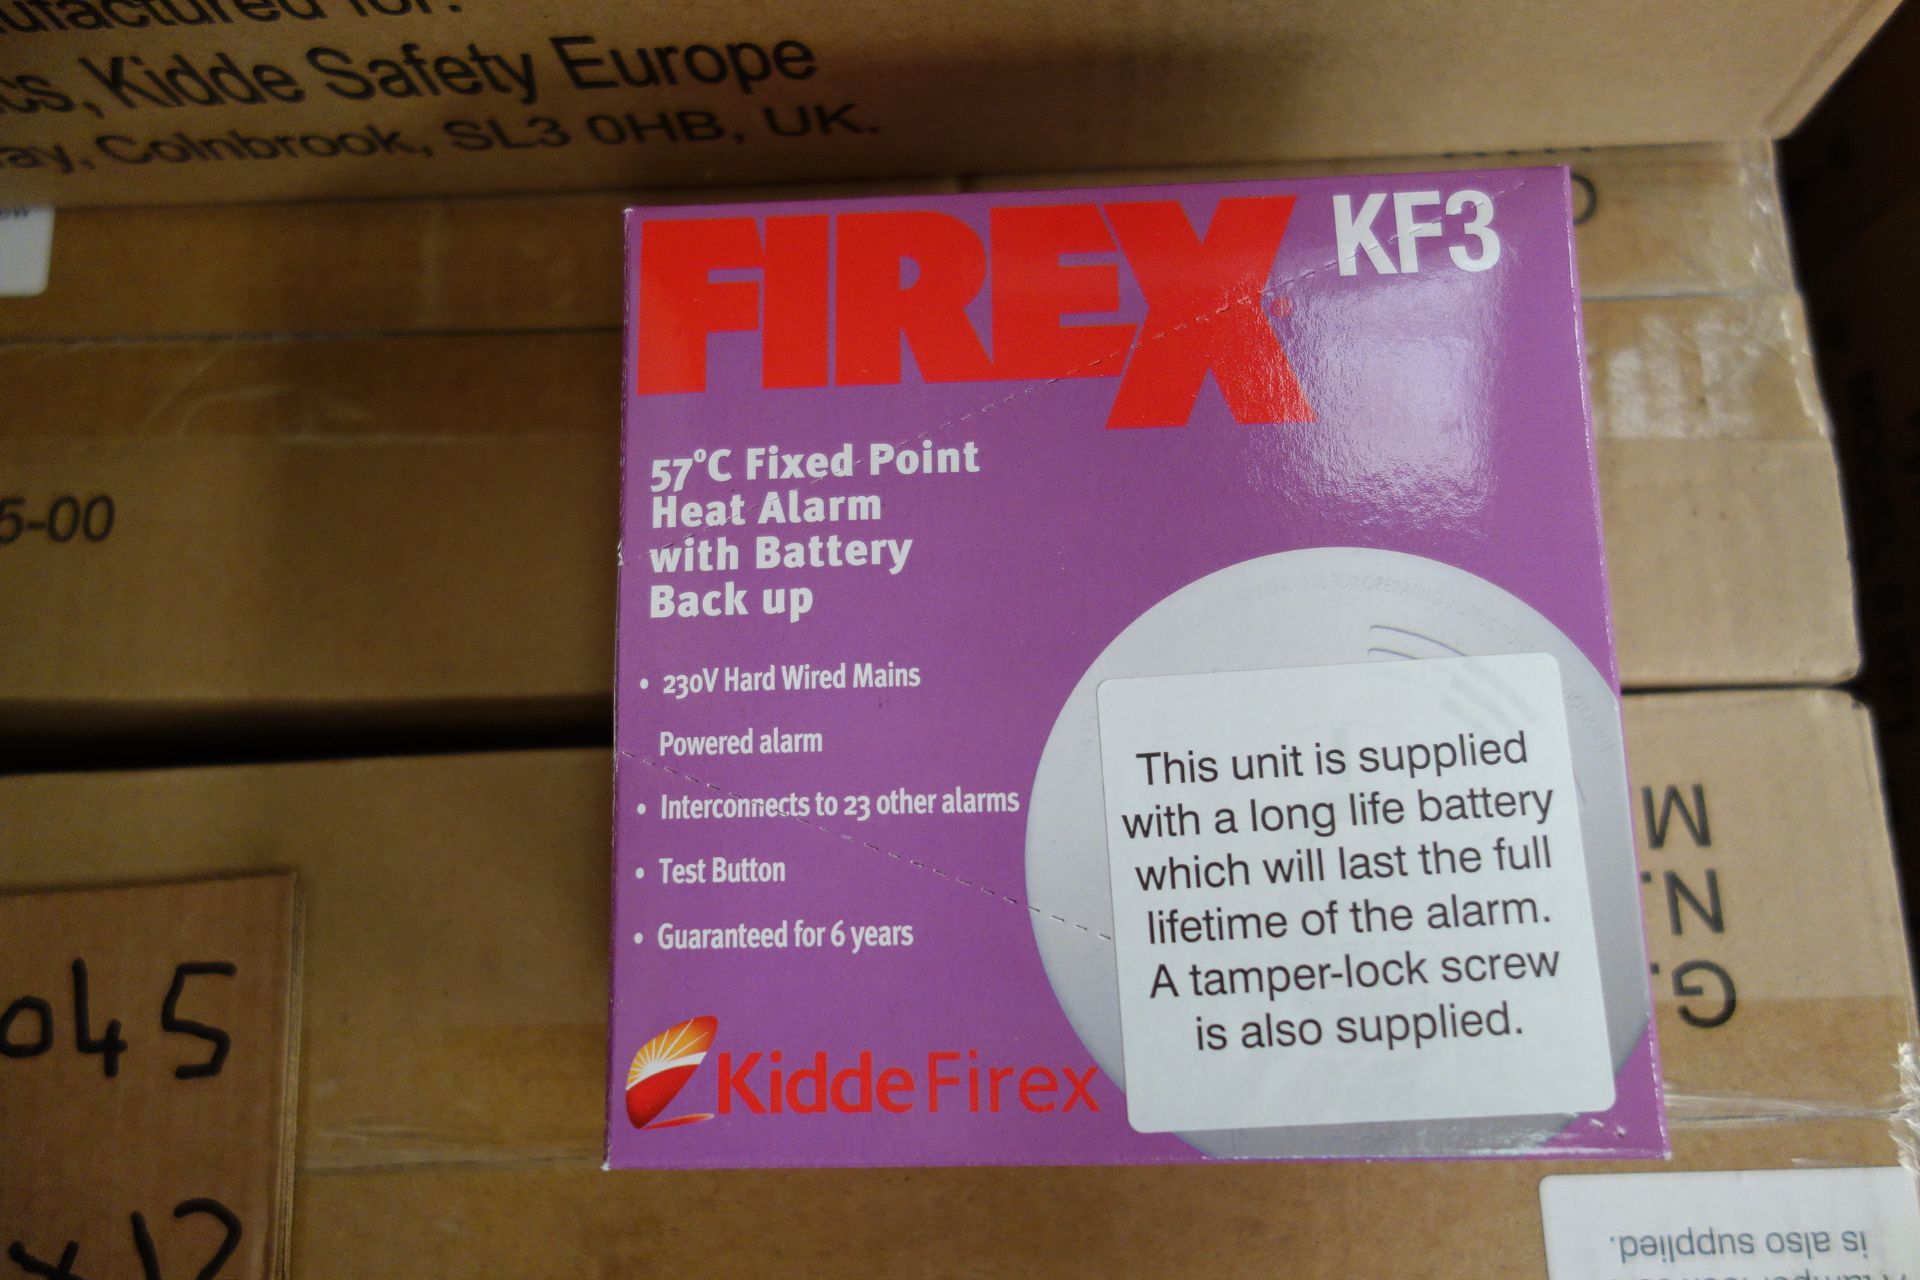 12 X Firex KF3 57C Fixed Point Heat Alarm With Battary Back Up Interconnects to 23 Other Alarms - Image 2 of 2